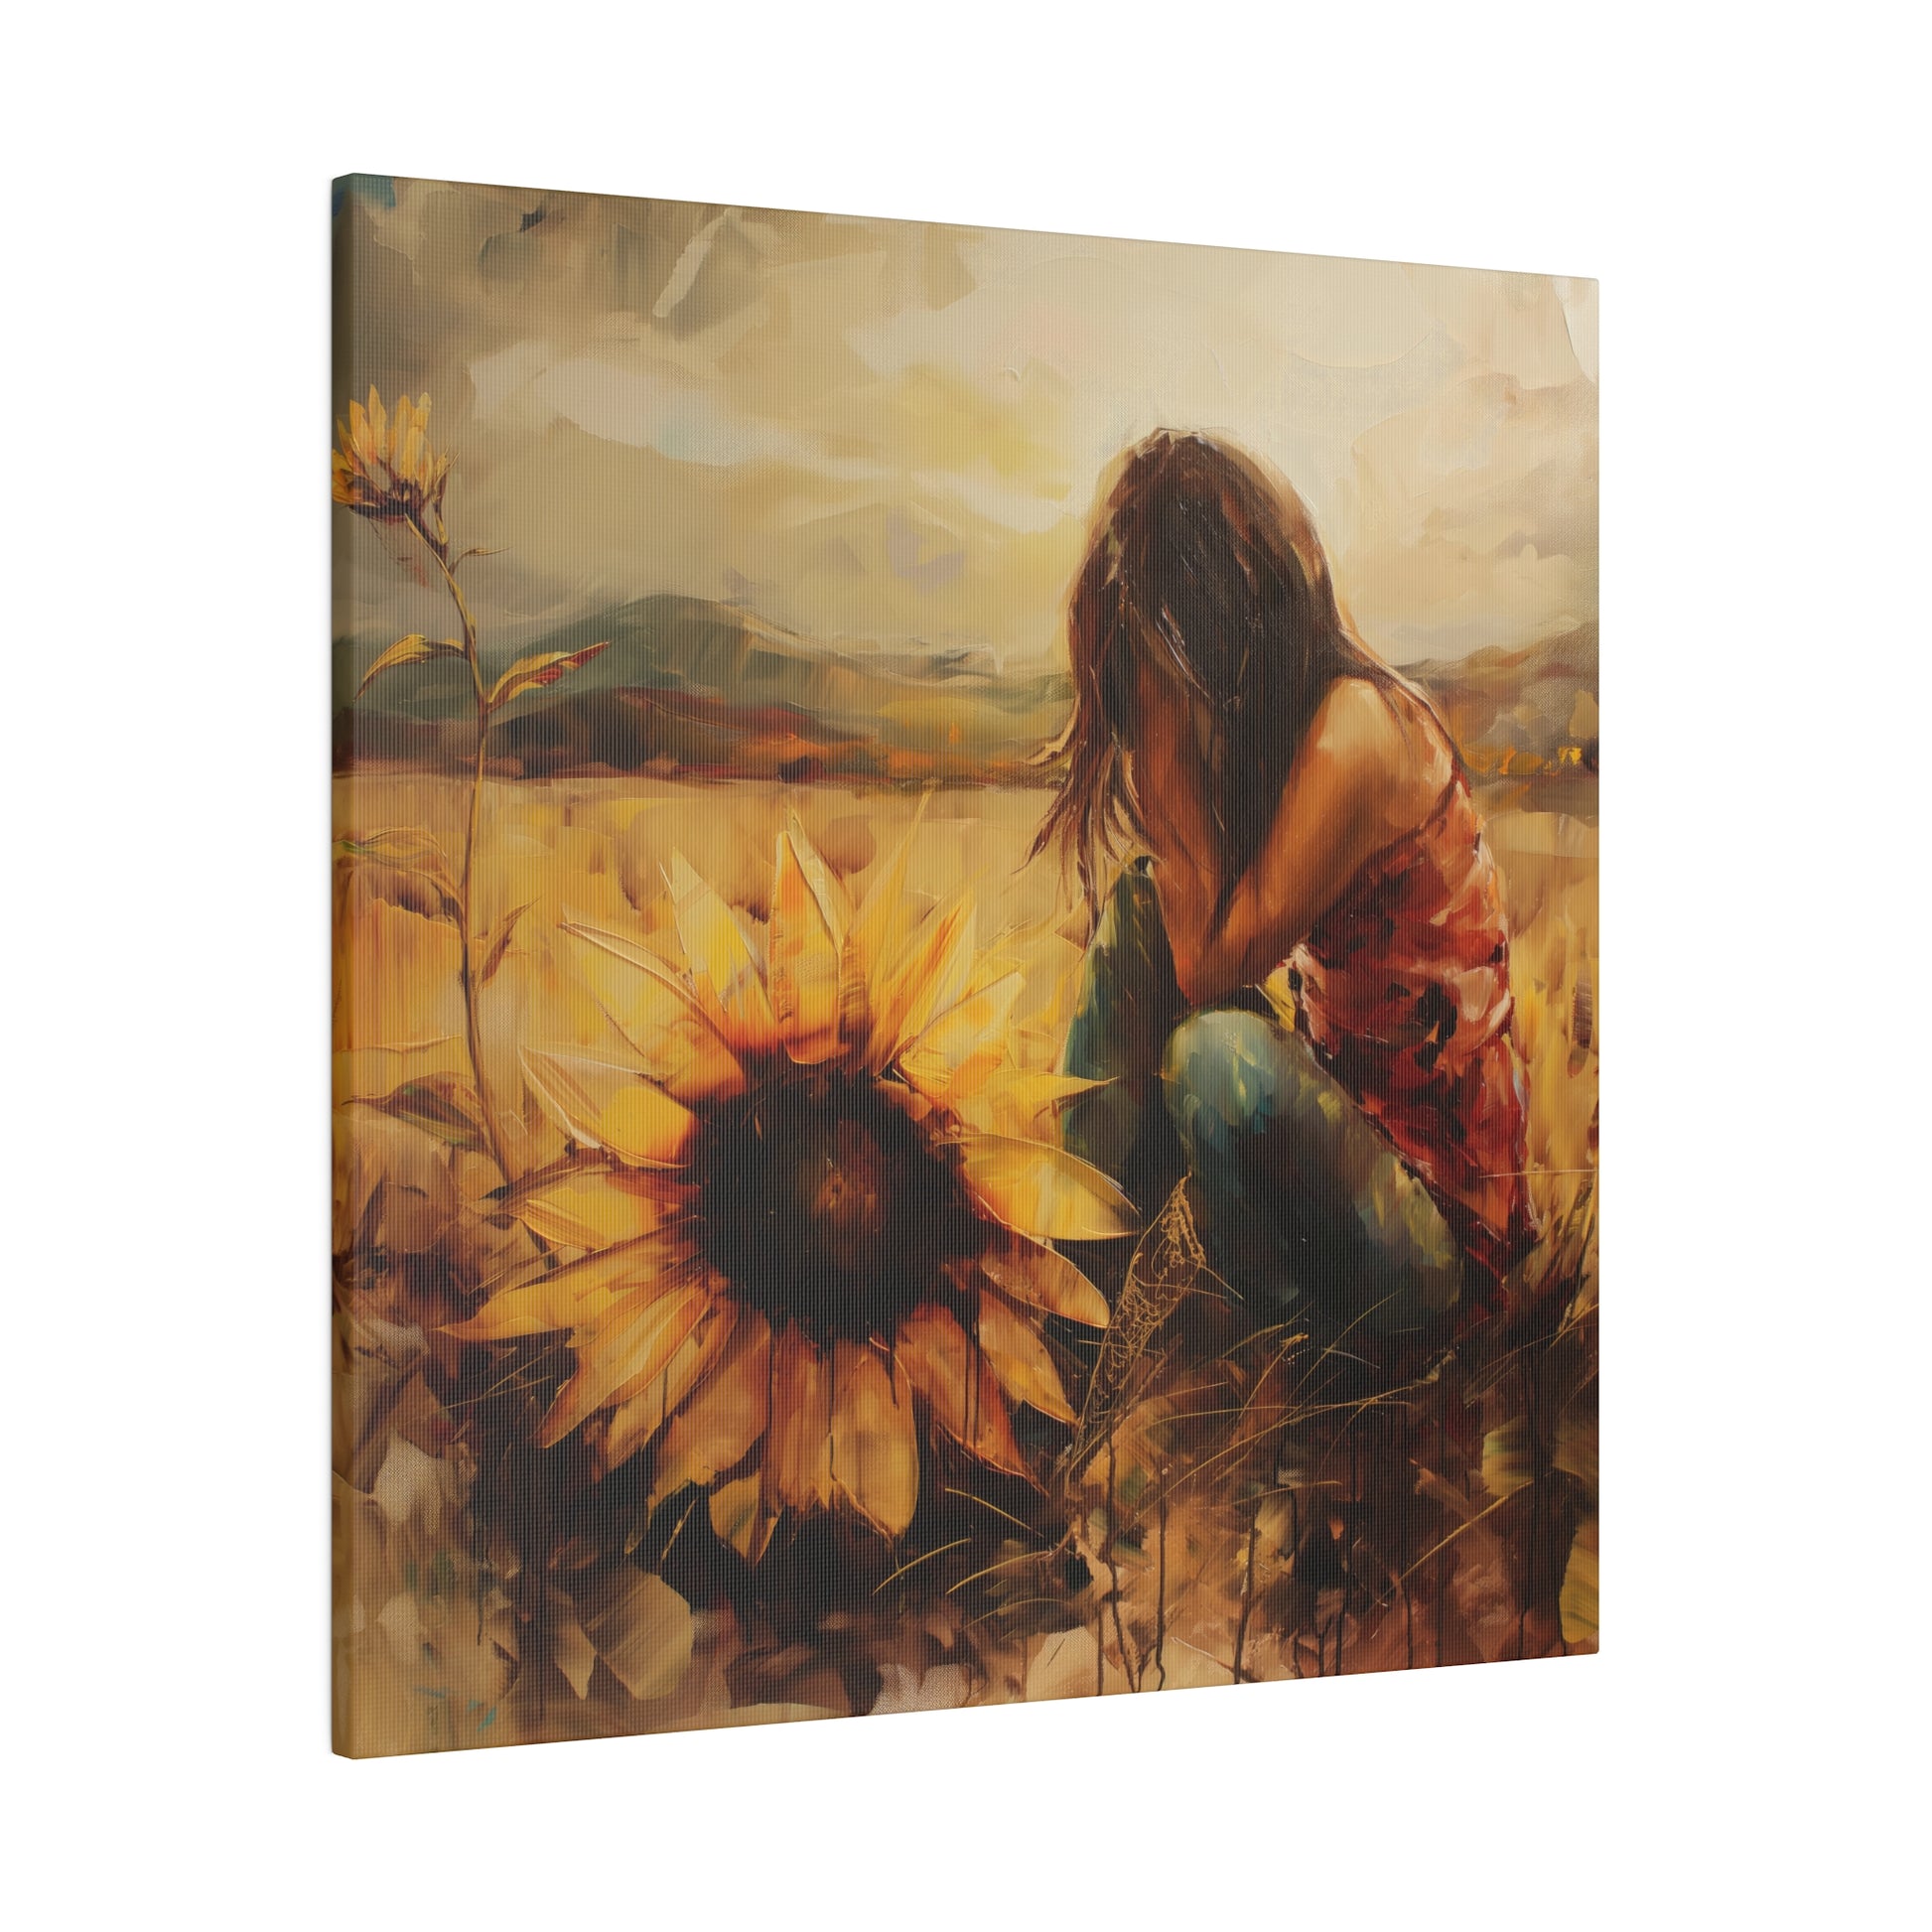 A Elena Duval: Solace in Solitude exclusive canvas print by Printify depicting a woman sitting in a field of sunflowers, capturing the emotive artistry of human experience.